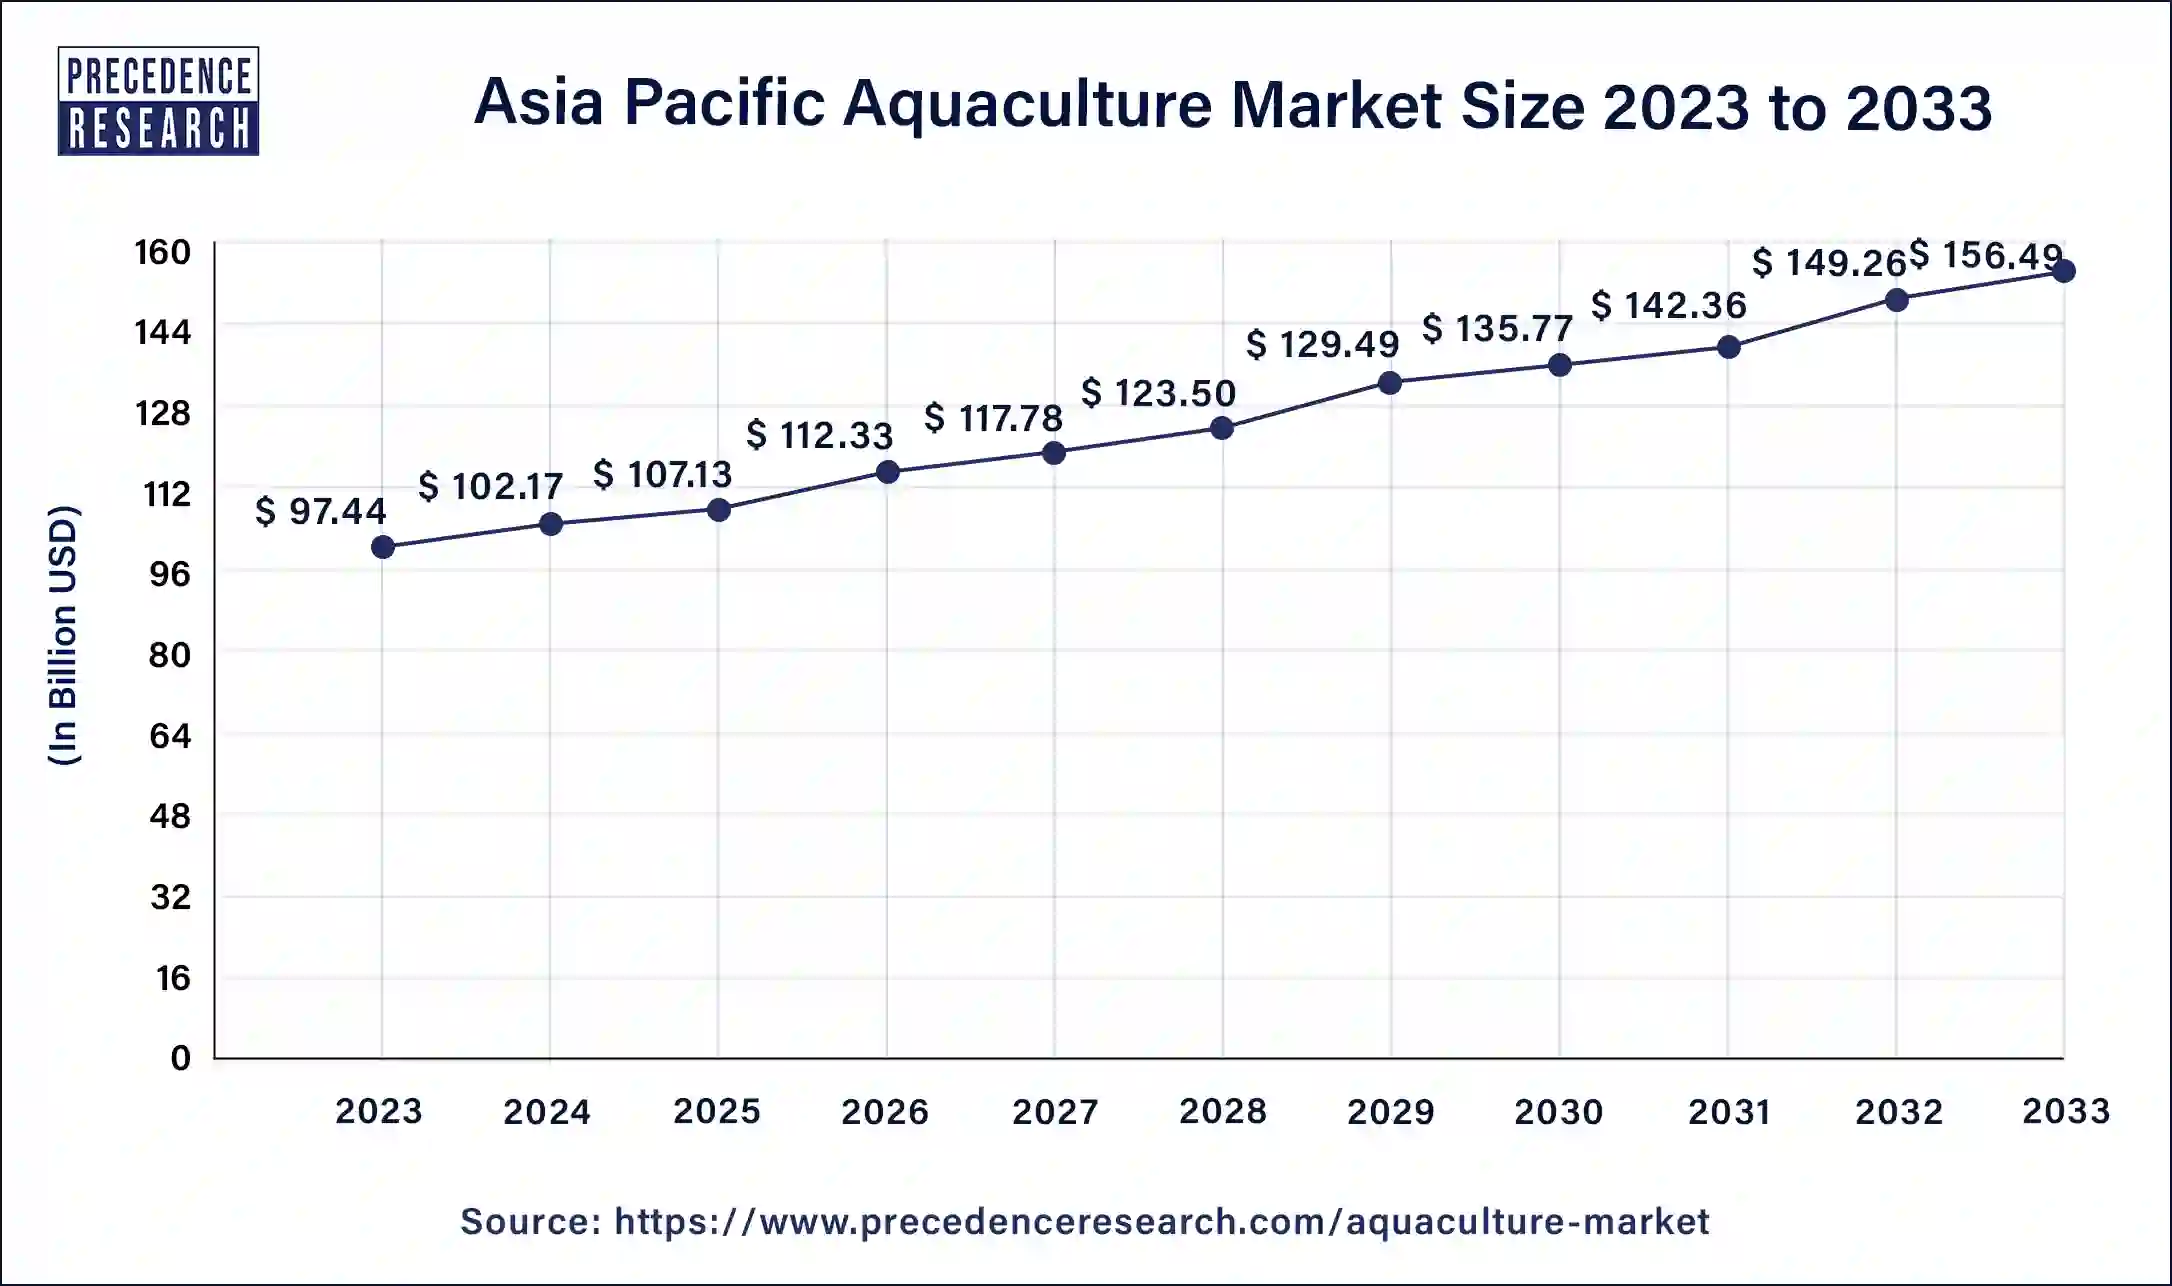 Asia Pacific Aquaculture Market Size 2024 to 2033